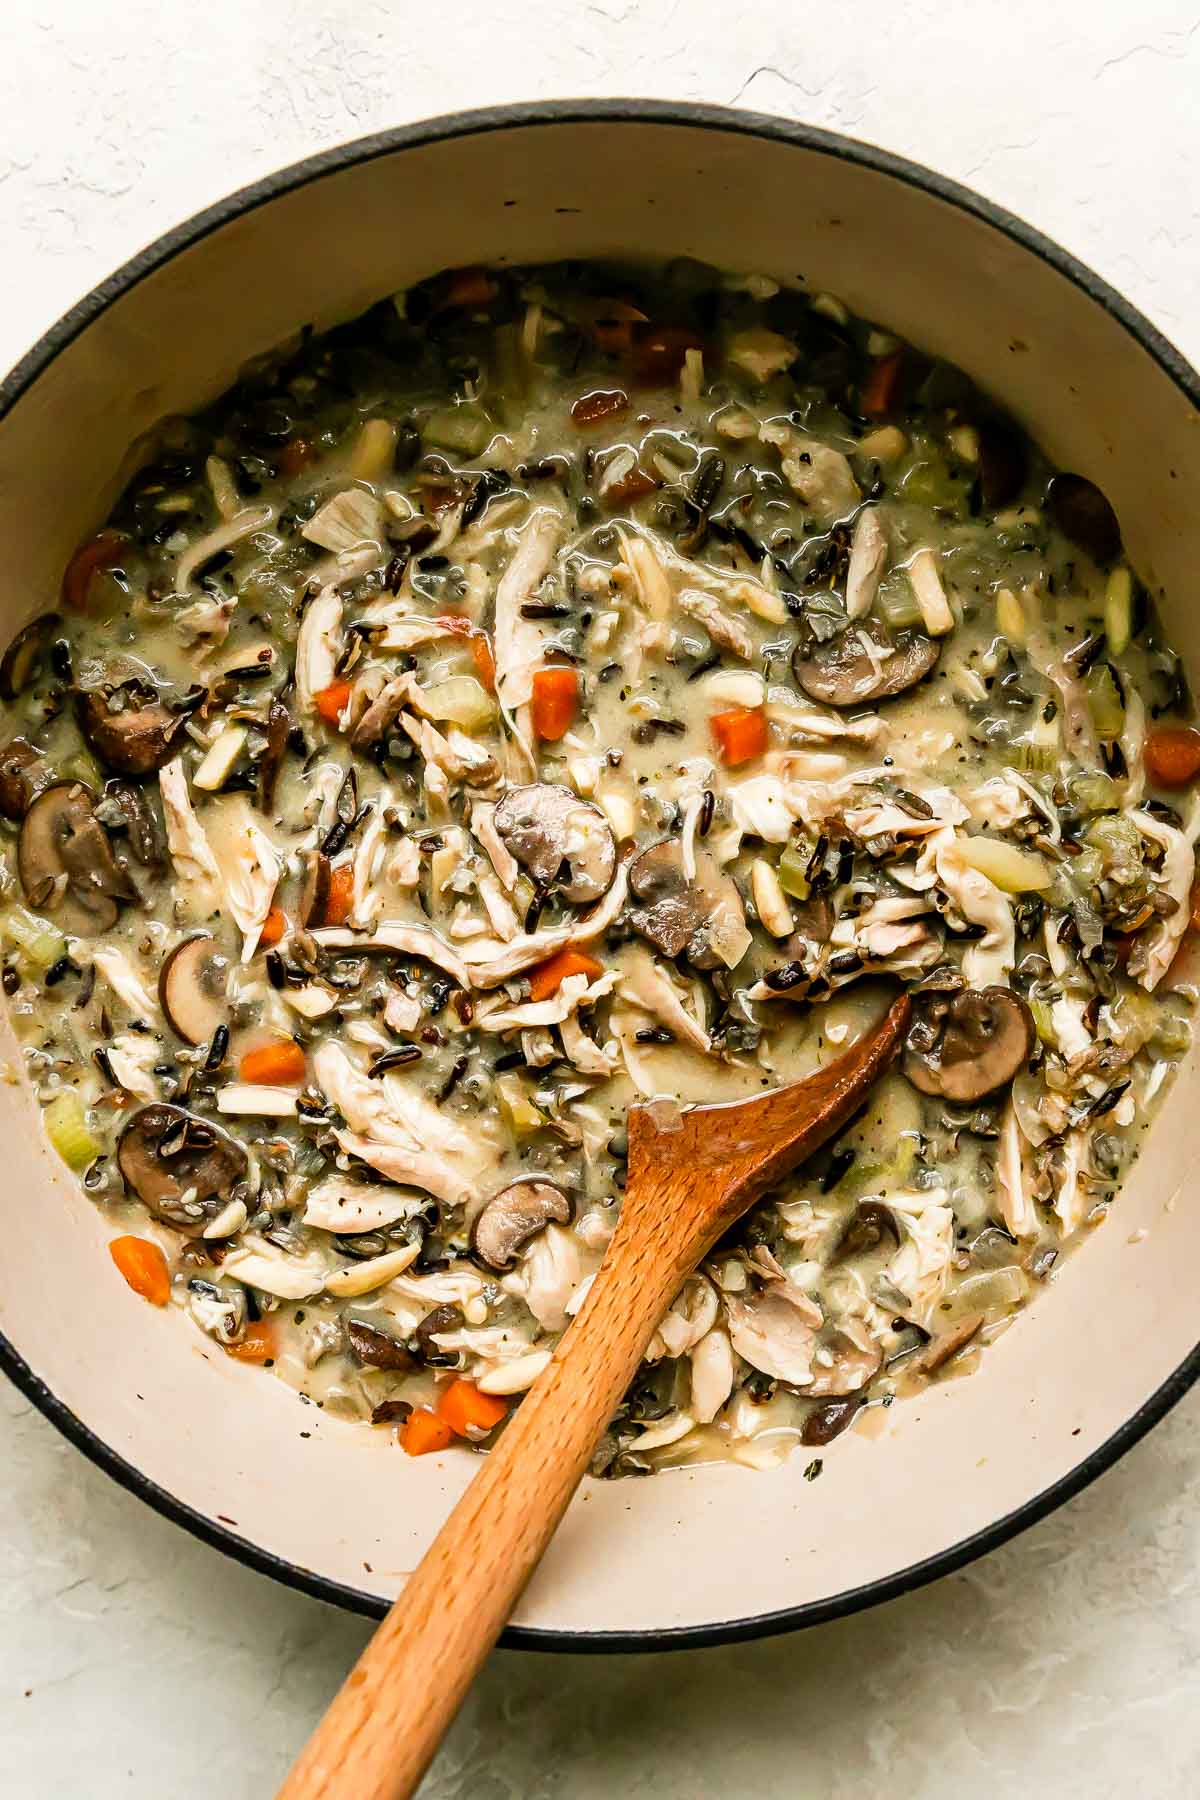 The beginning of easy chicken and wild rice soup fills a large heavy-bottomed pot that sits atop a creamy white textured surface. A wooden spoon rests inside of the pot for stirring.